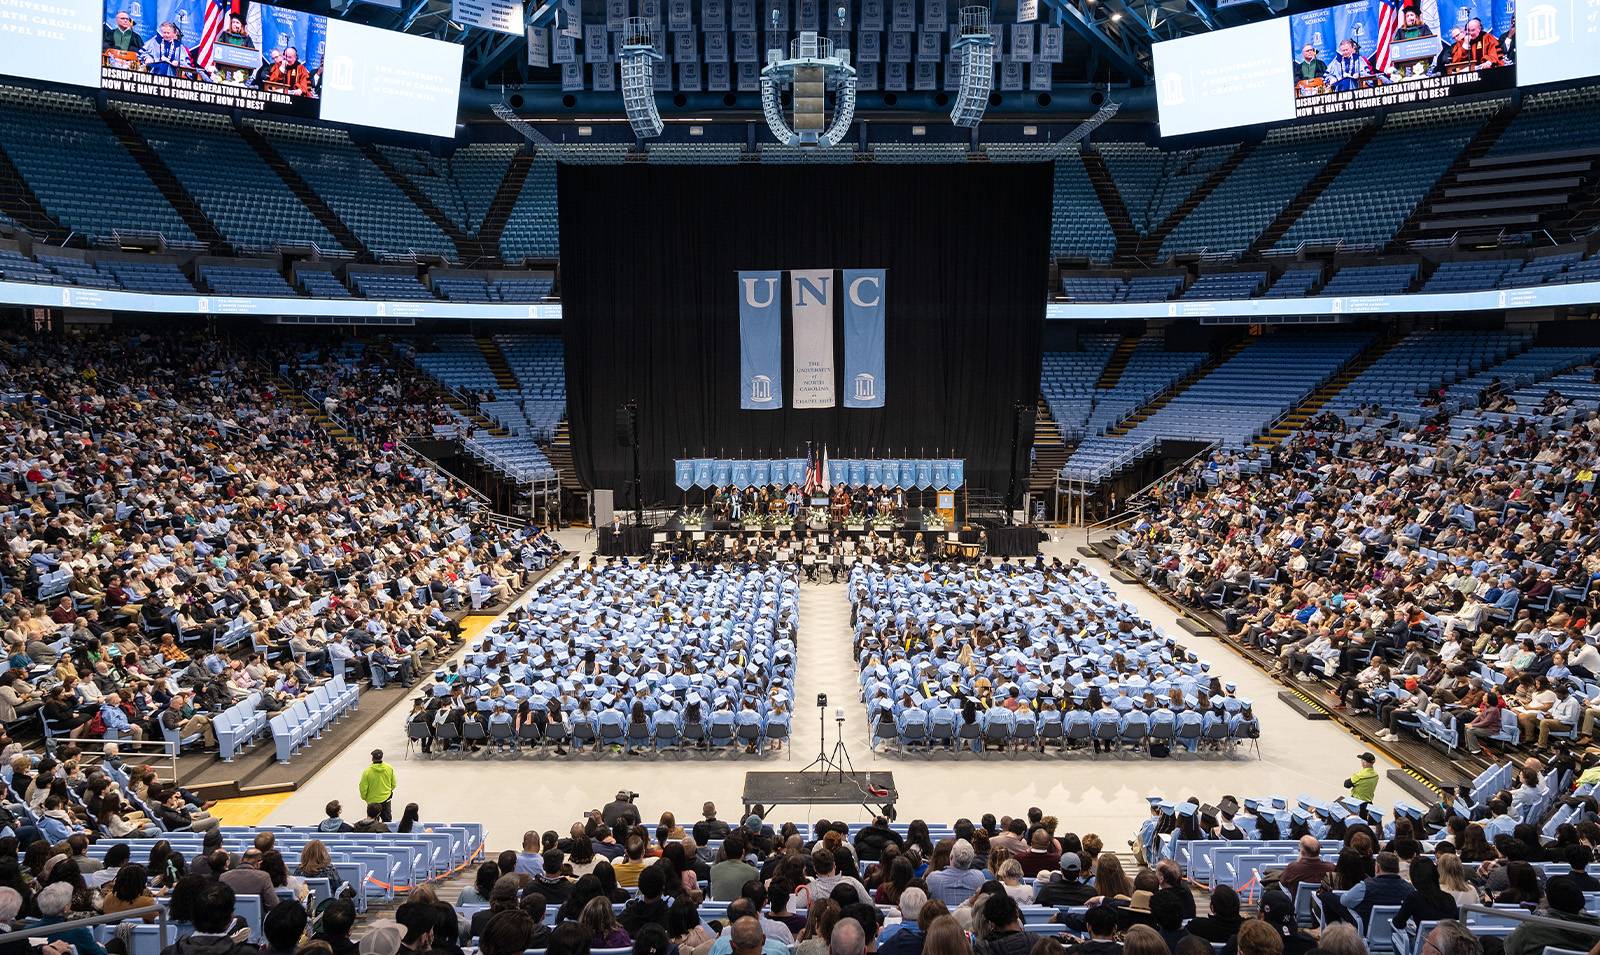 Far-distanced crowd shot of graduates and attendees at Winter Commencement in the Dean E. Smith Center.